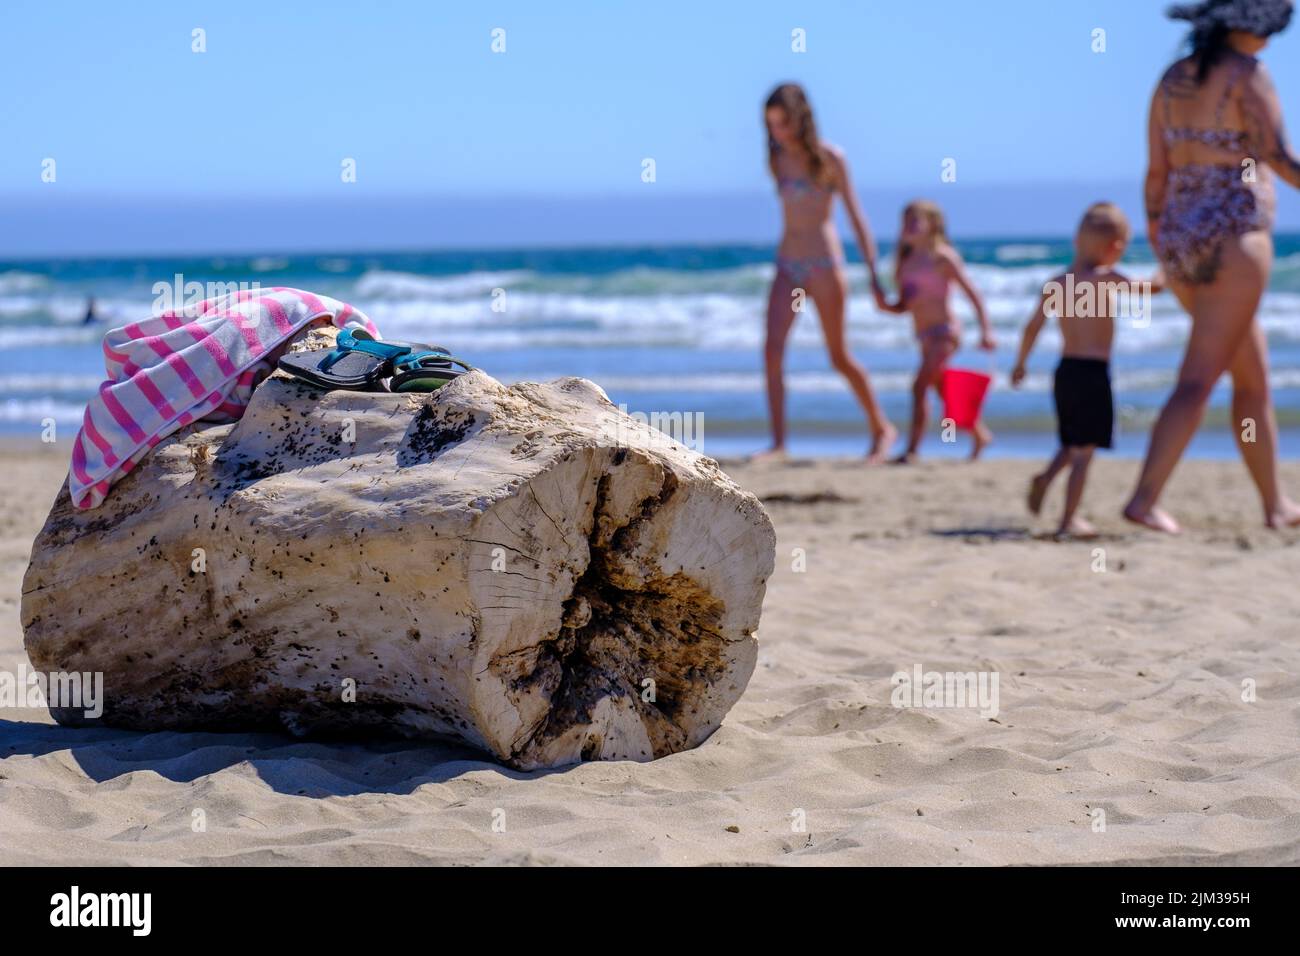 Close-up of a log on the beach with a towel & flip flops on top. People walking on the beach & the ocean in the background. Stock Photo